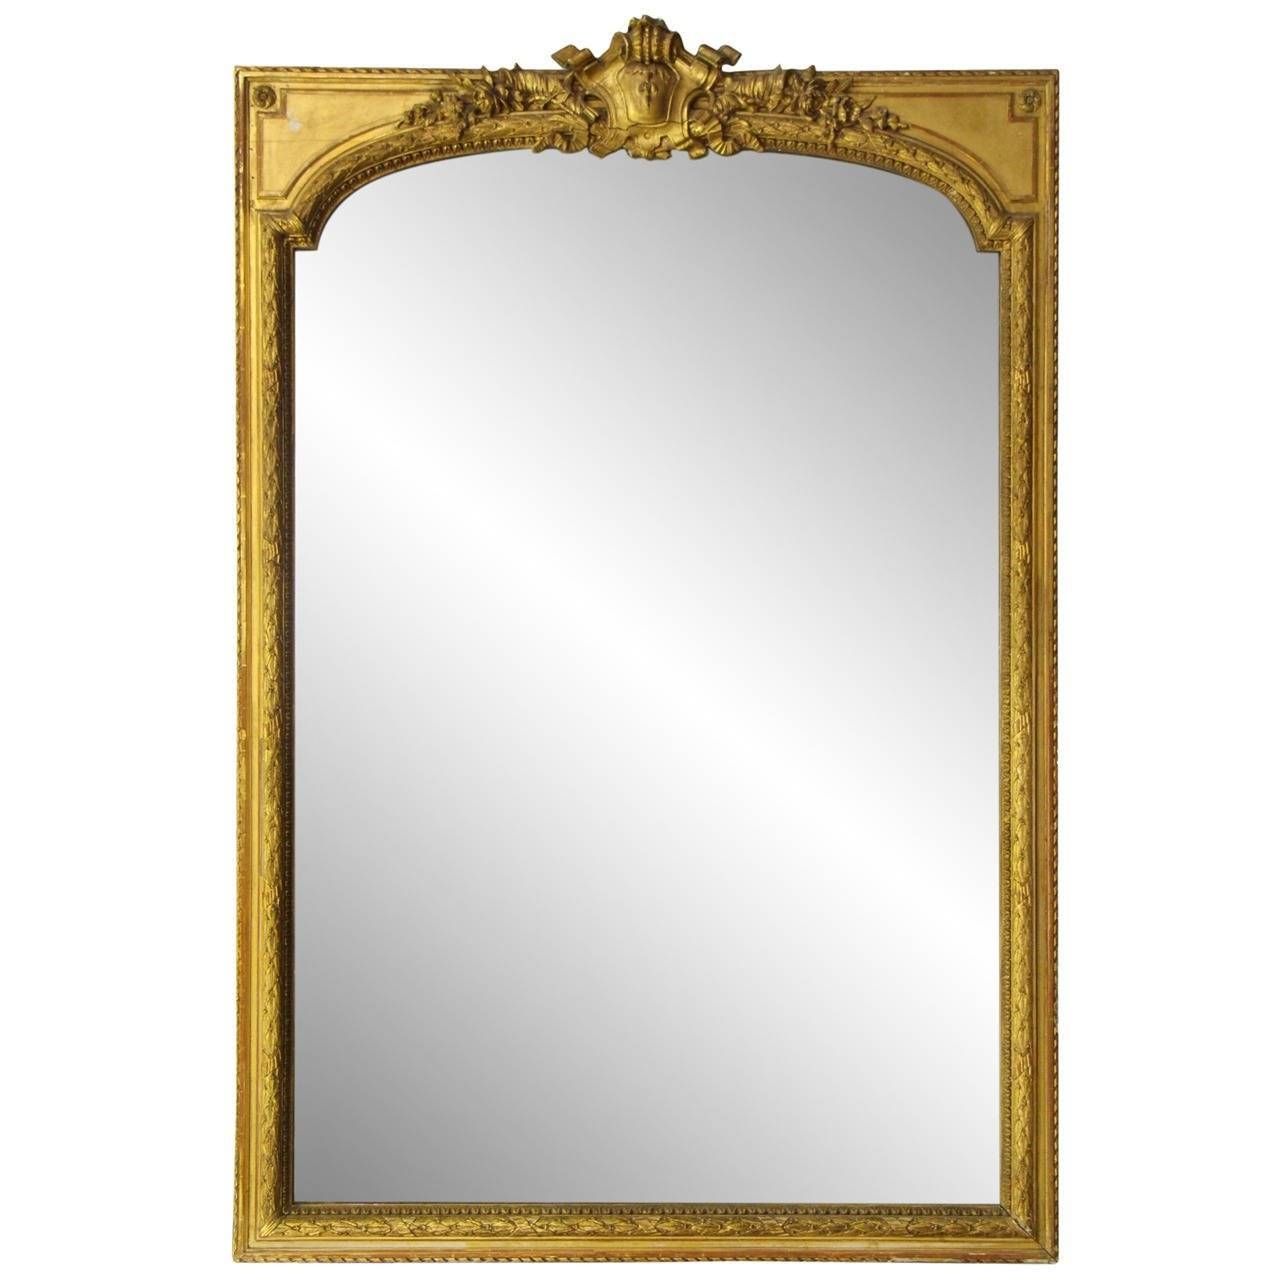 Late 1800s French Gold Gilt Ornate Mirror For Sale At 1stdibs Throughout Tall Ornate Mirrors (View 6 of 15)